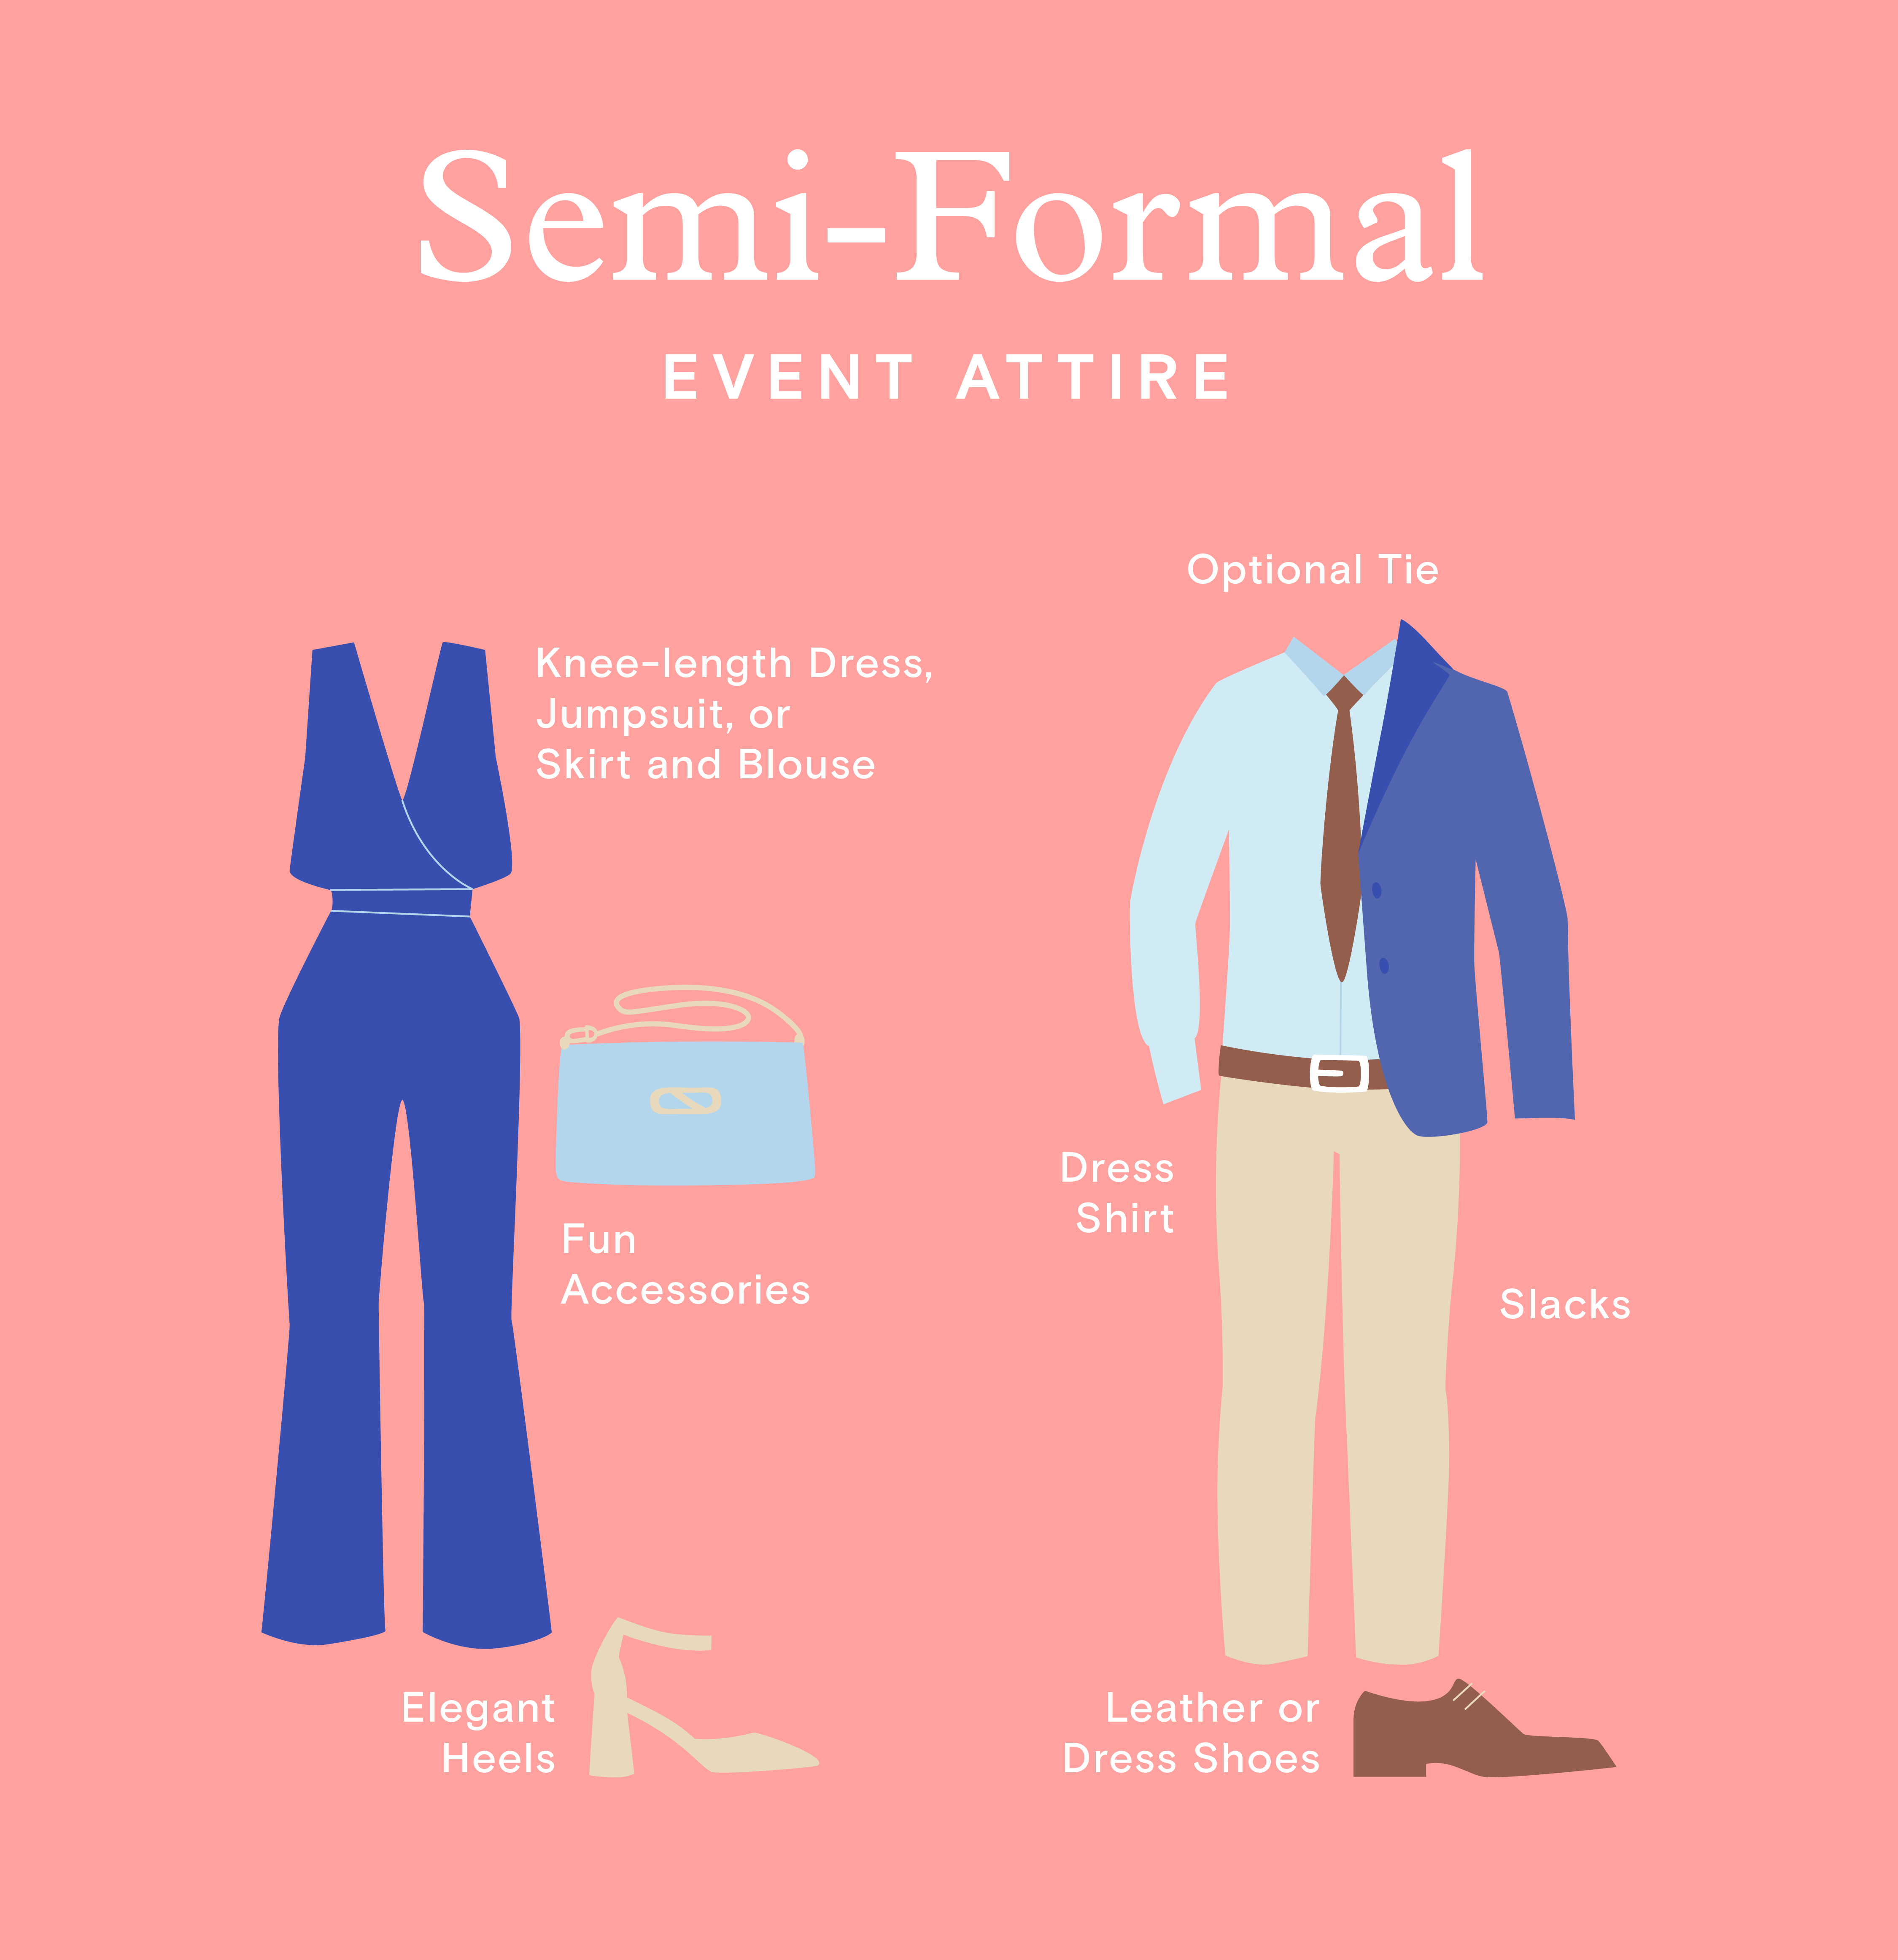 An illustration of semi-formal attire for women and for men featuring items from the list like a fancy jumpsuit, men’s slacks, and dress shoes.